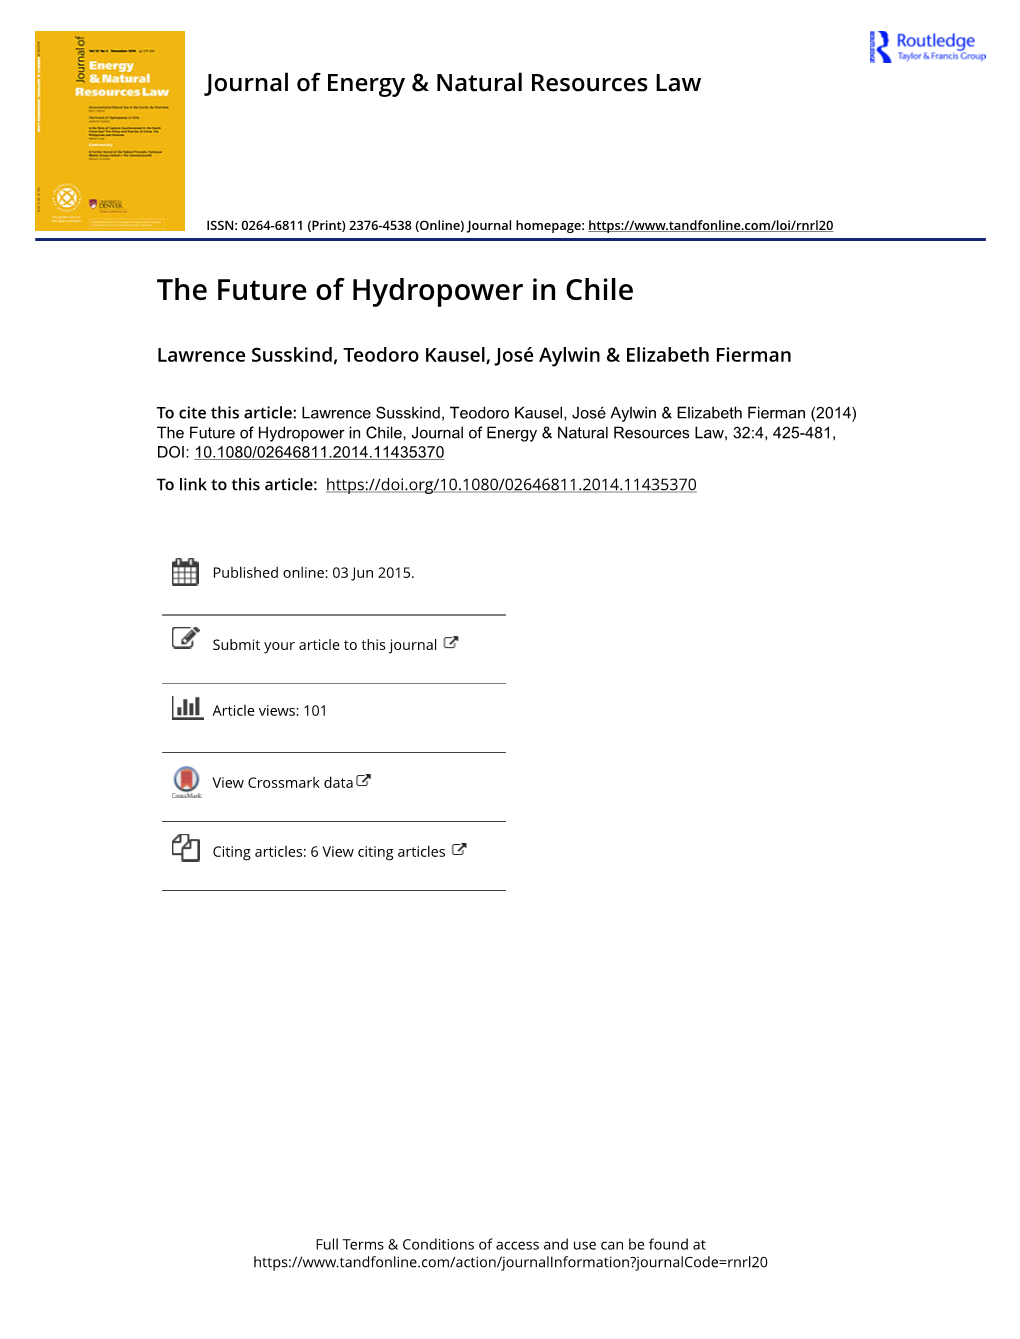 The Future of Hydropower in Chile